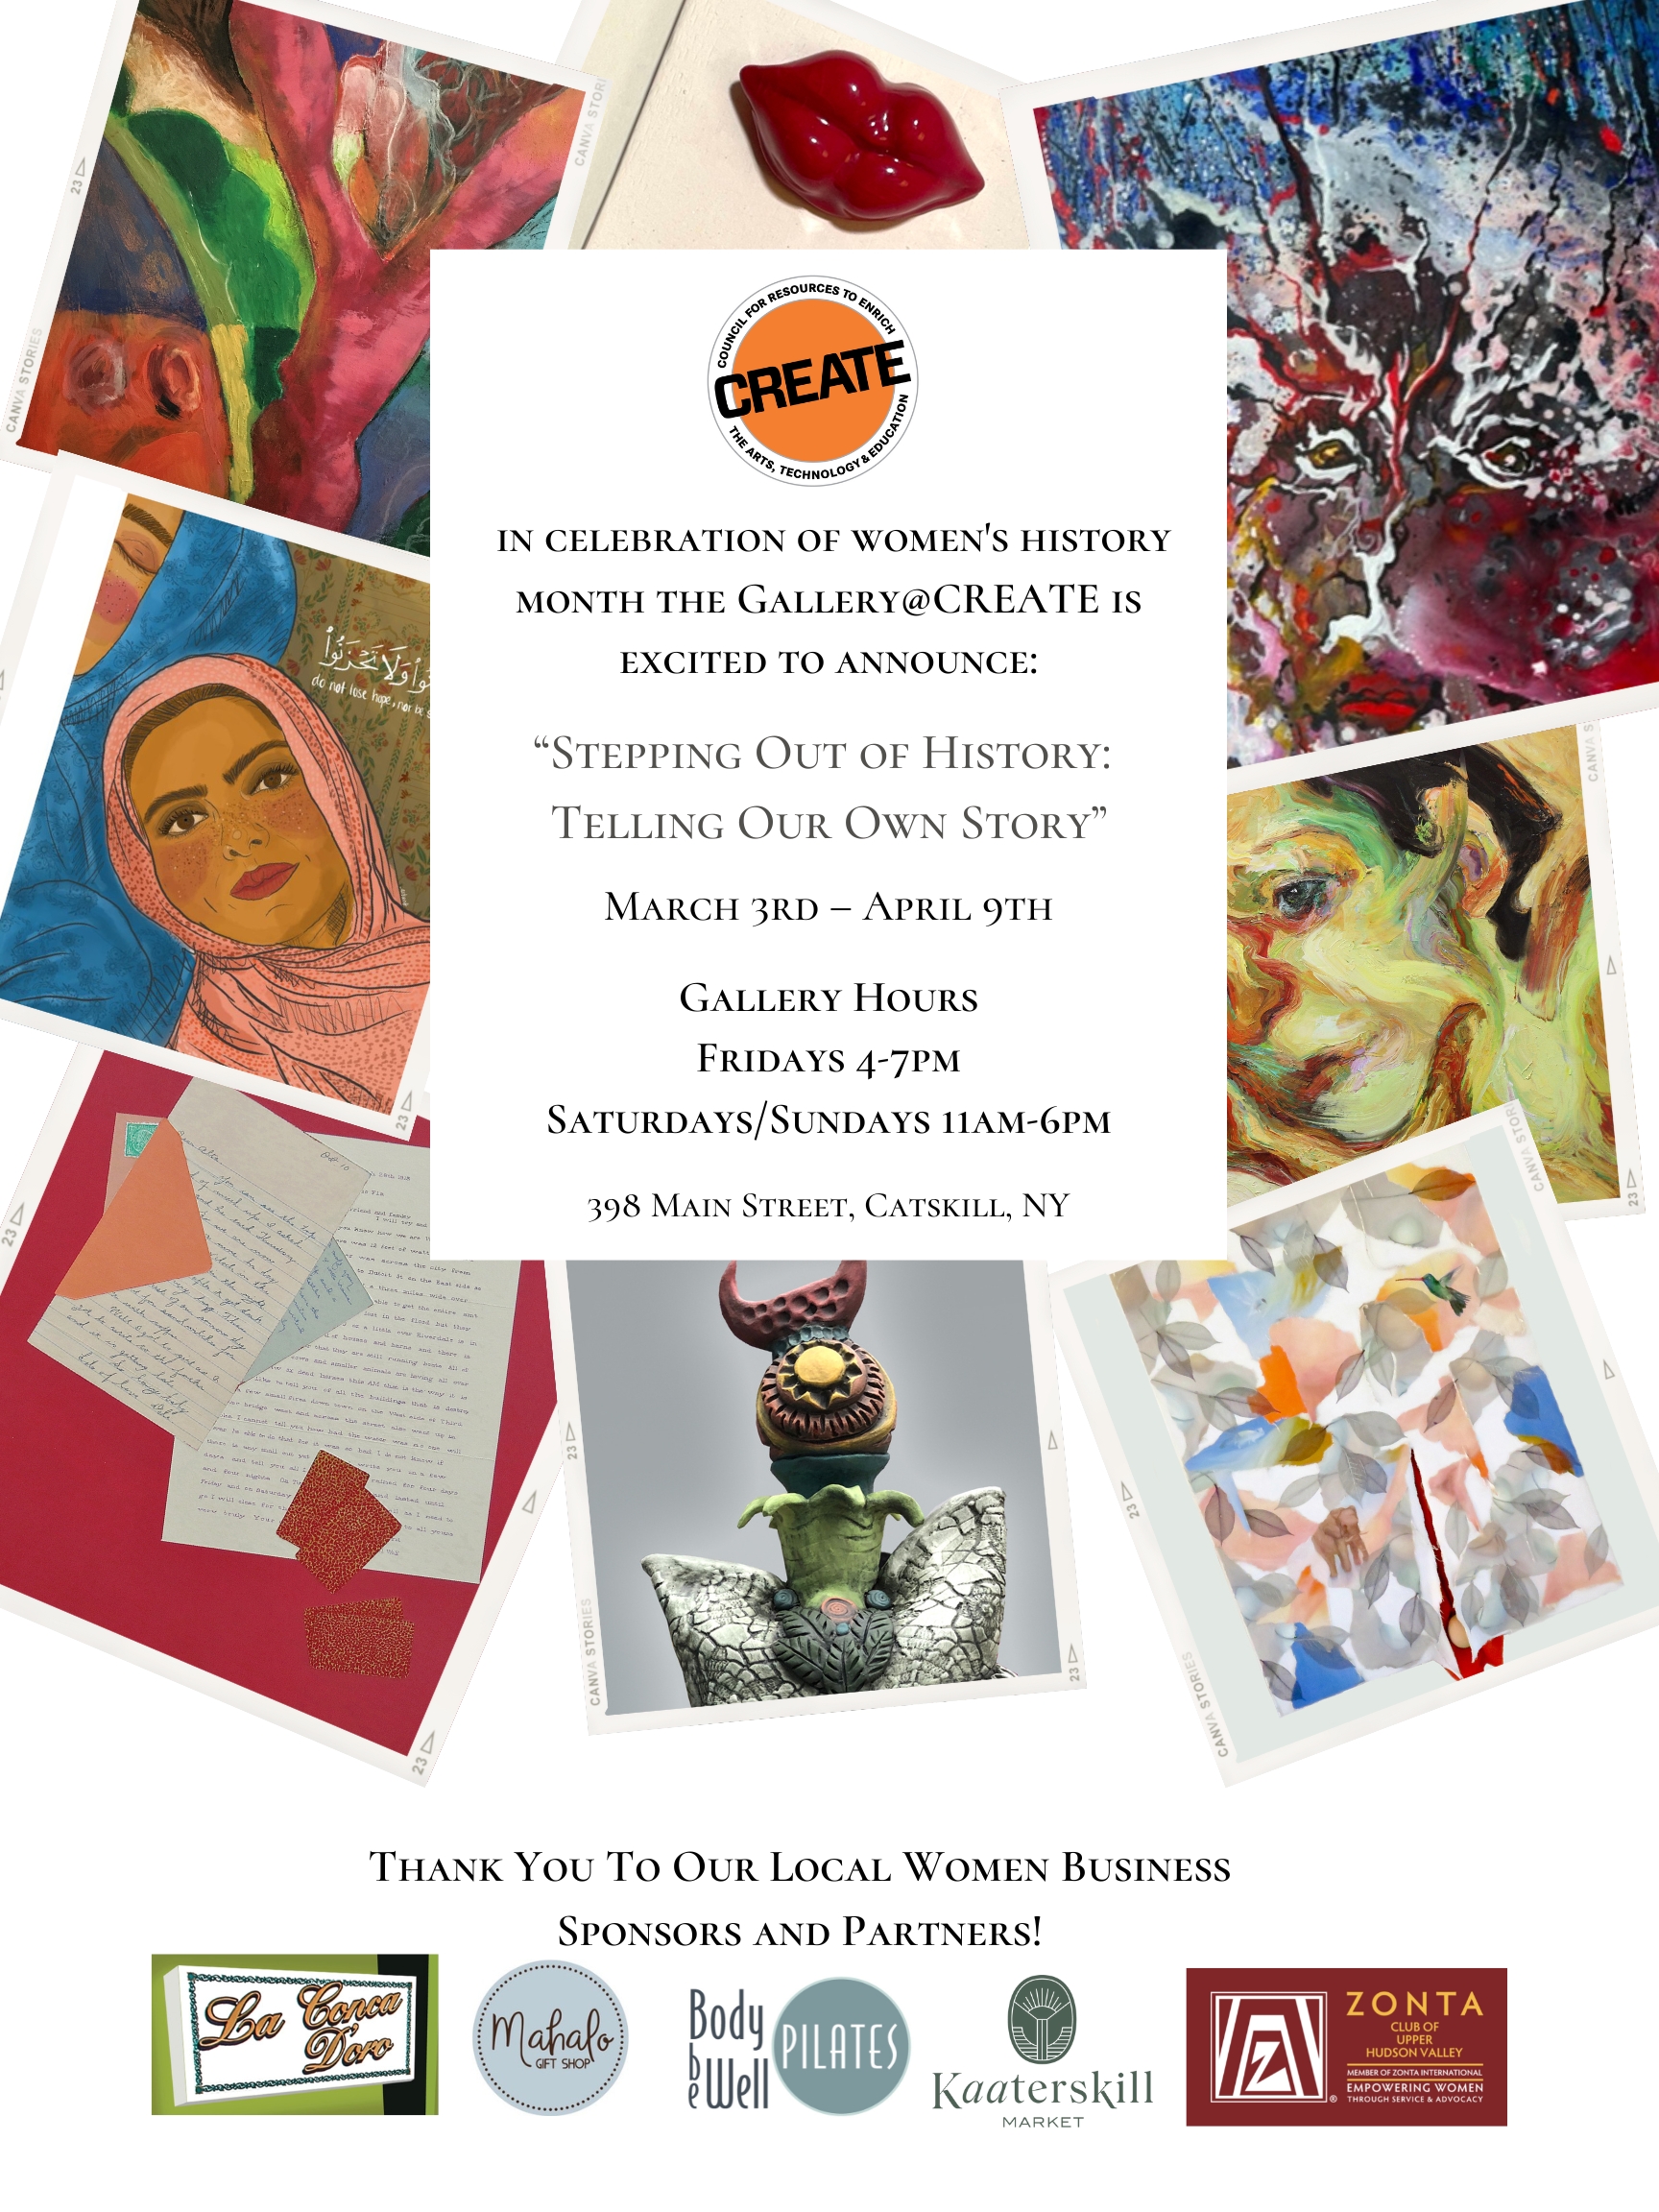 Flyer for Stepping out of History Exhibit at CREATE in Catskill NY